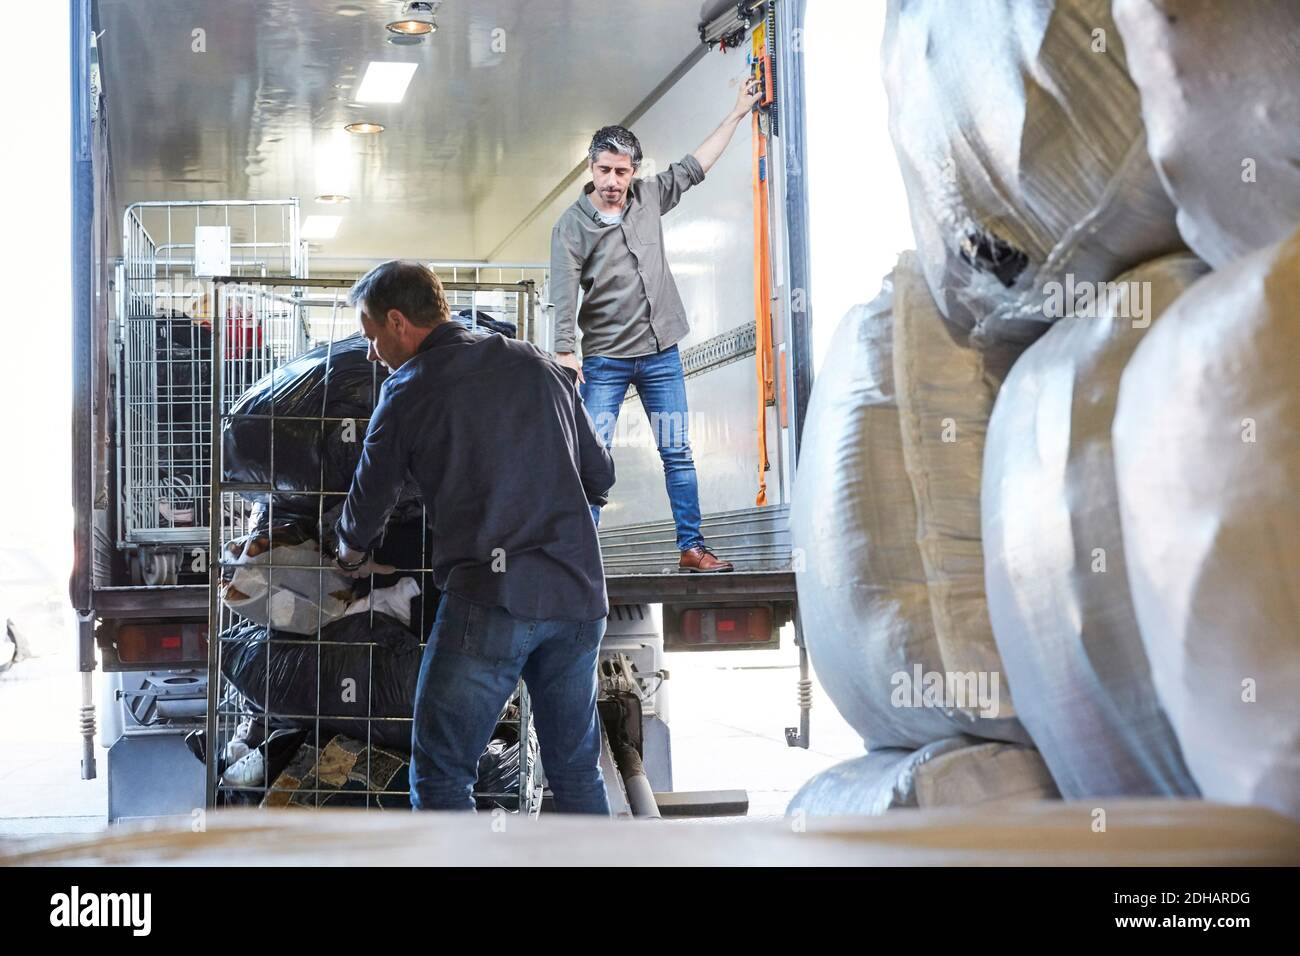 Mature coworkers unloading semi-truck at warehouse Stock Photo